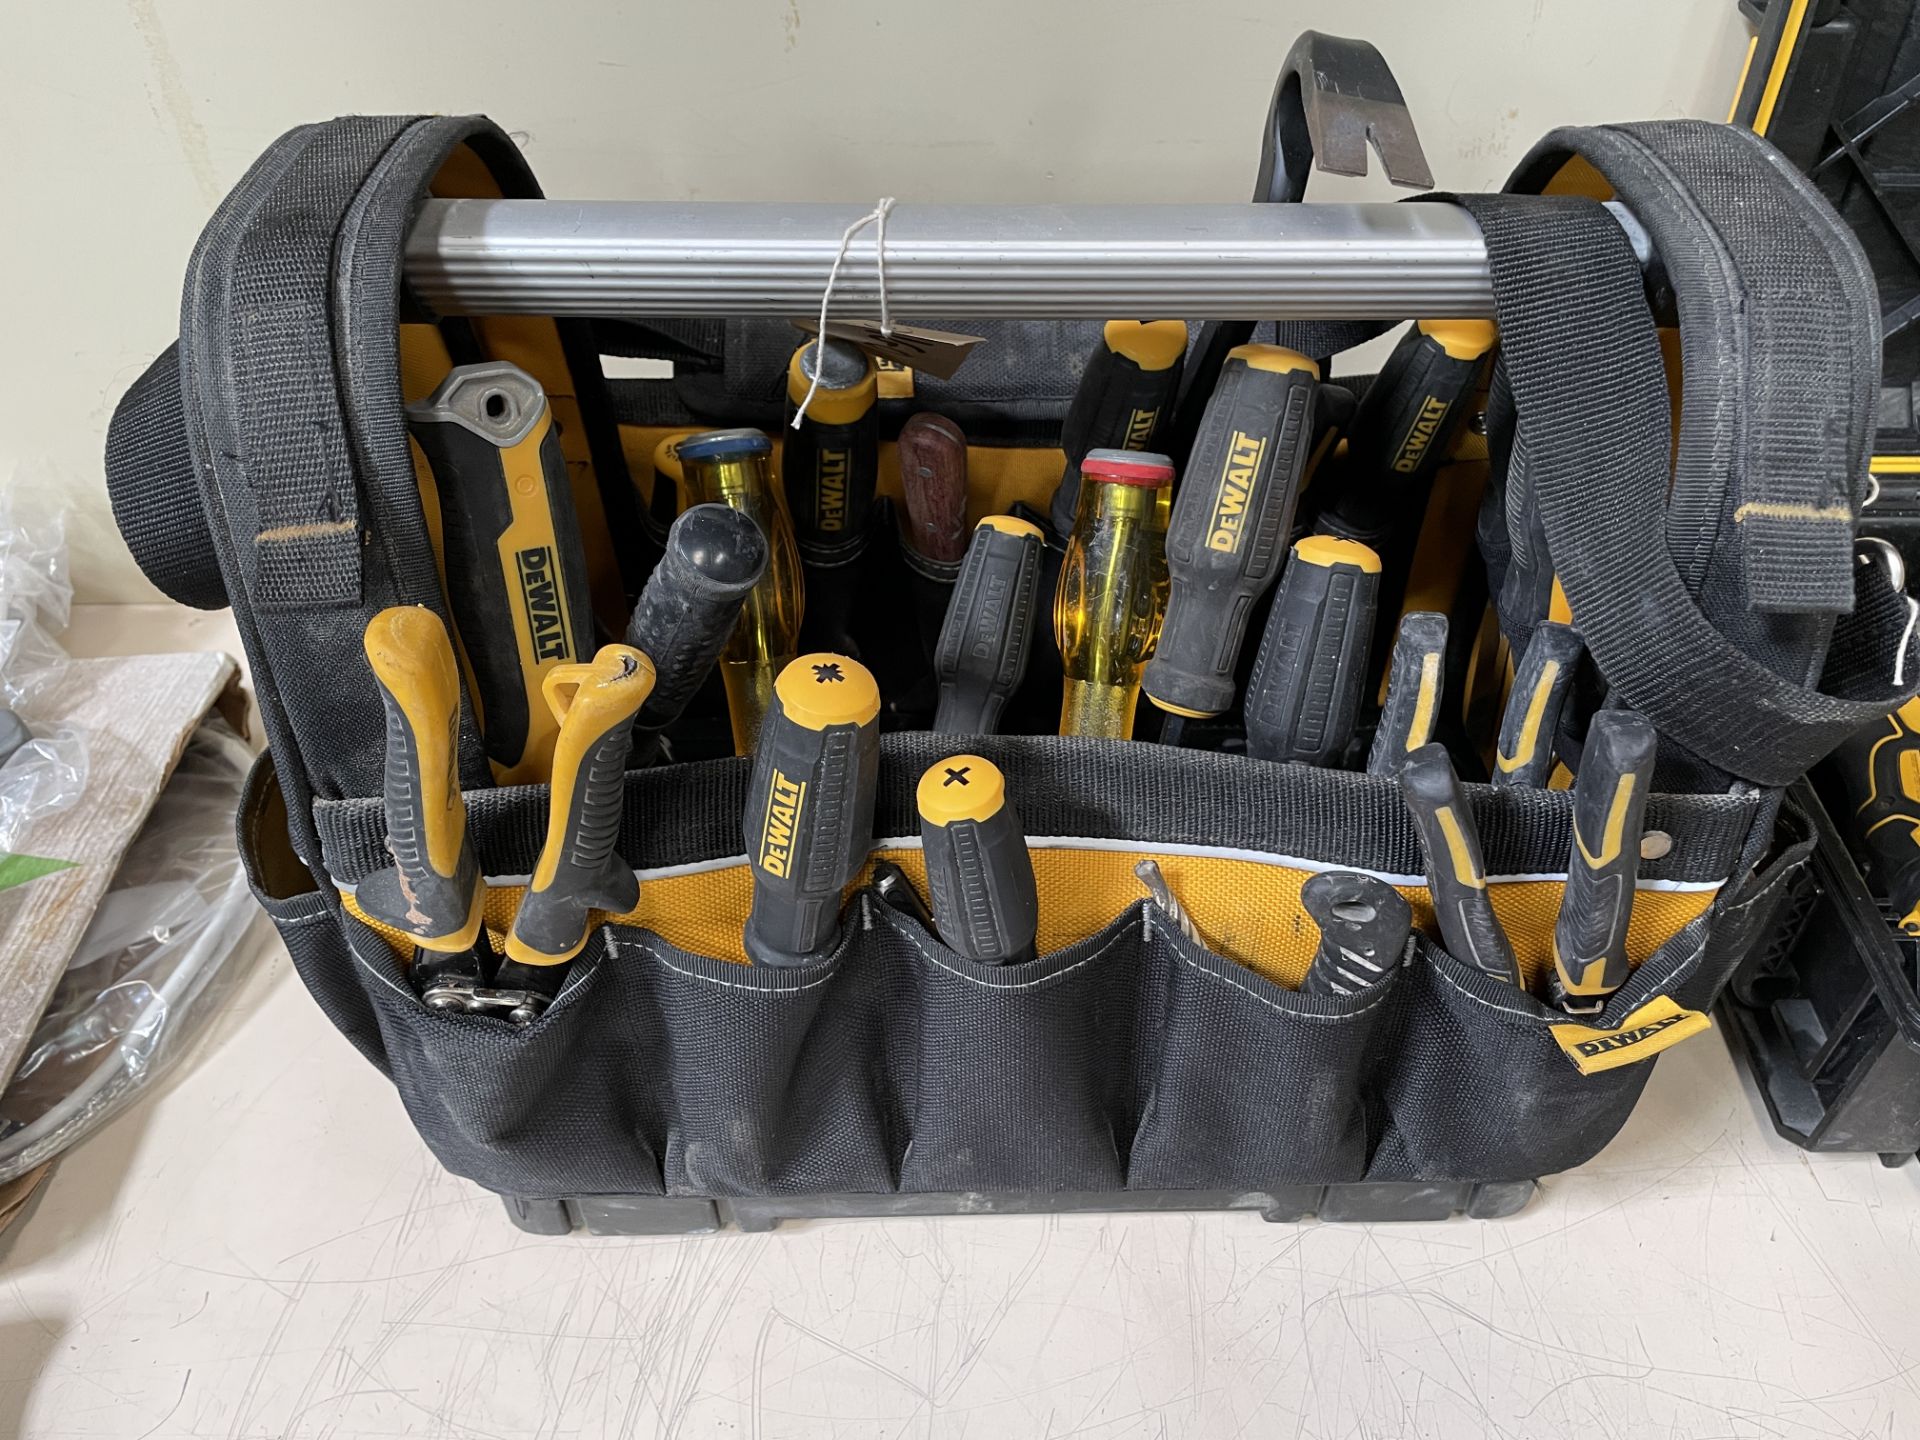 DeWalt Tool Bag with Small Range of Hand Tools (Location: Brentwood. Please Refer to General Notes)